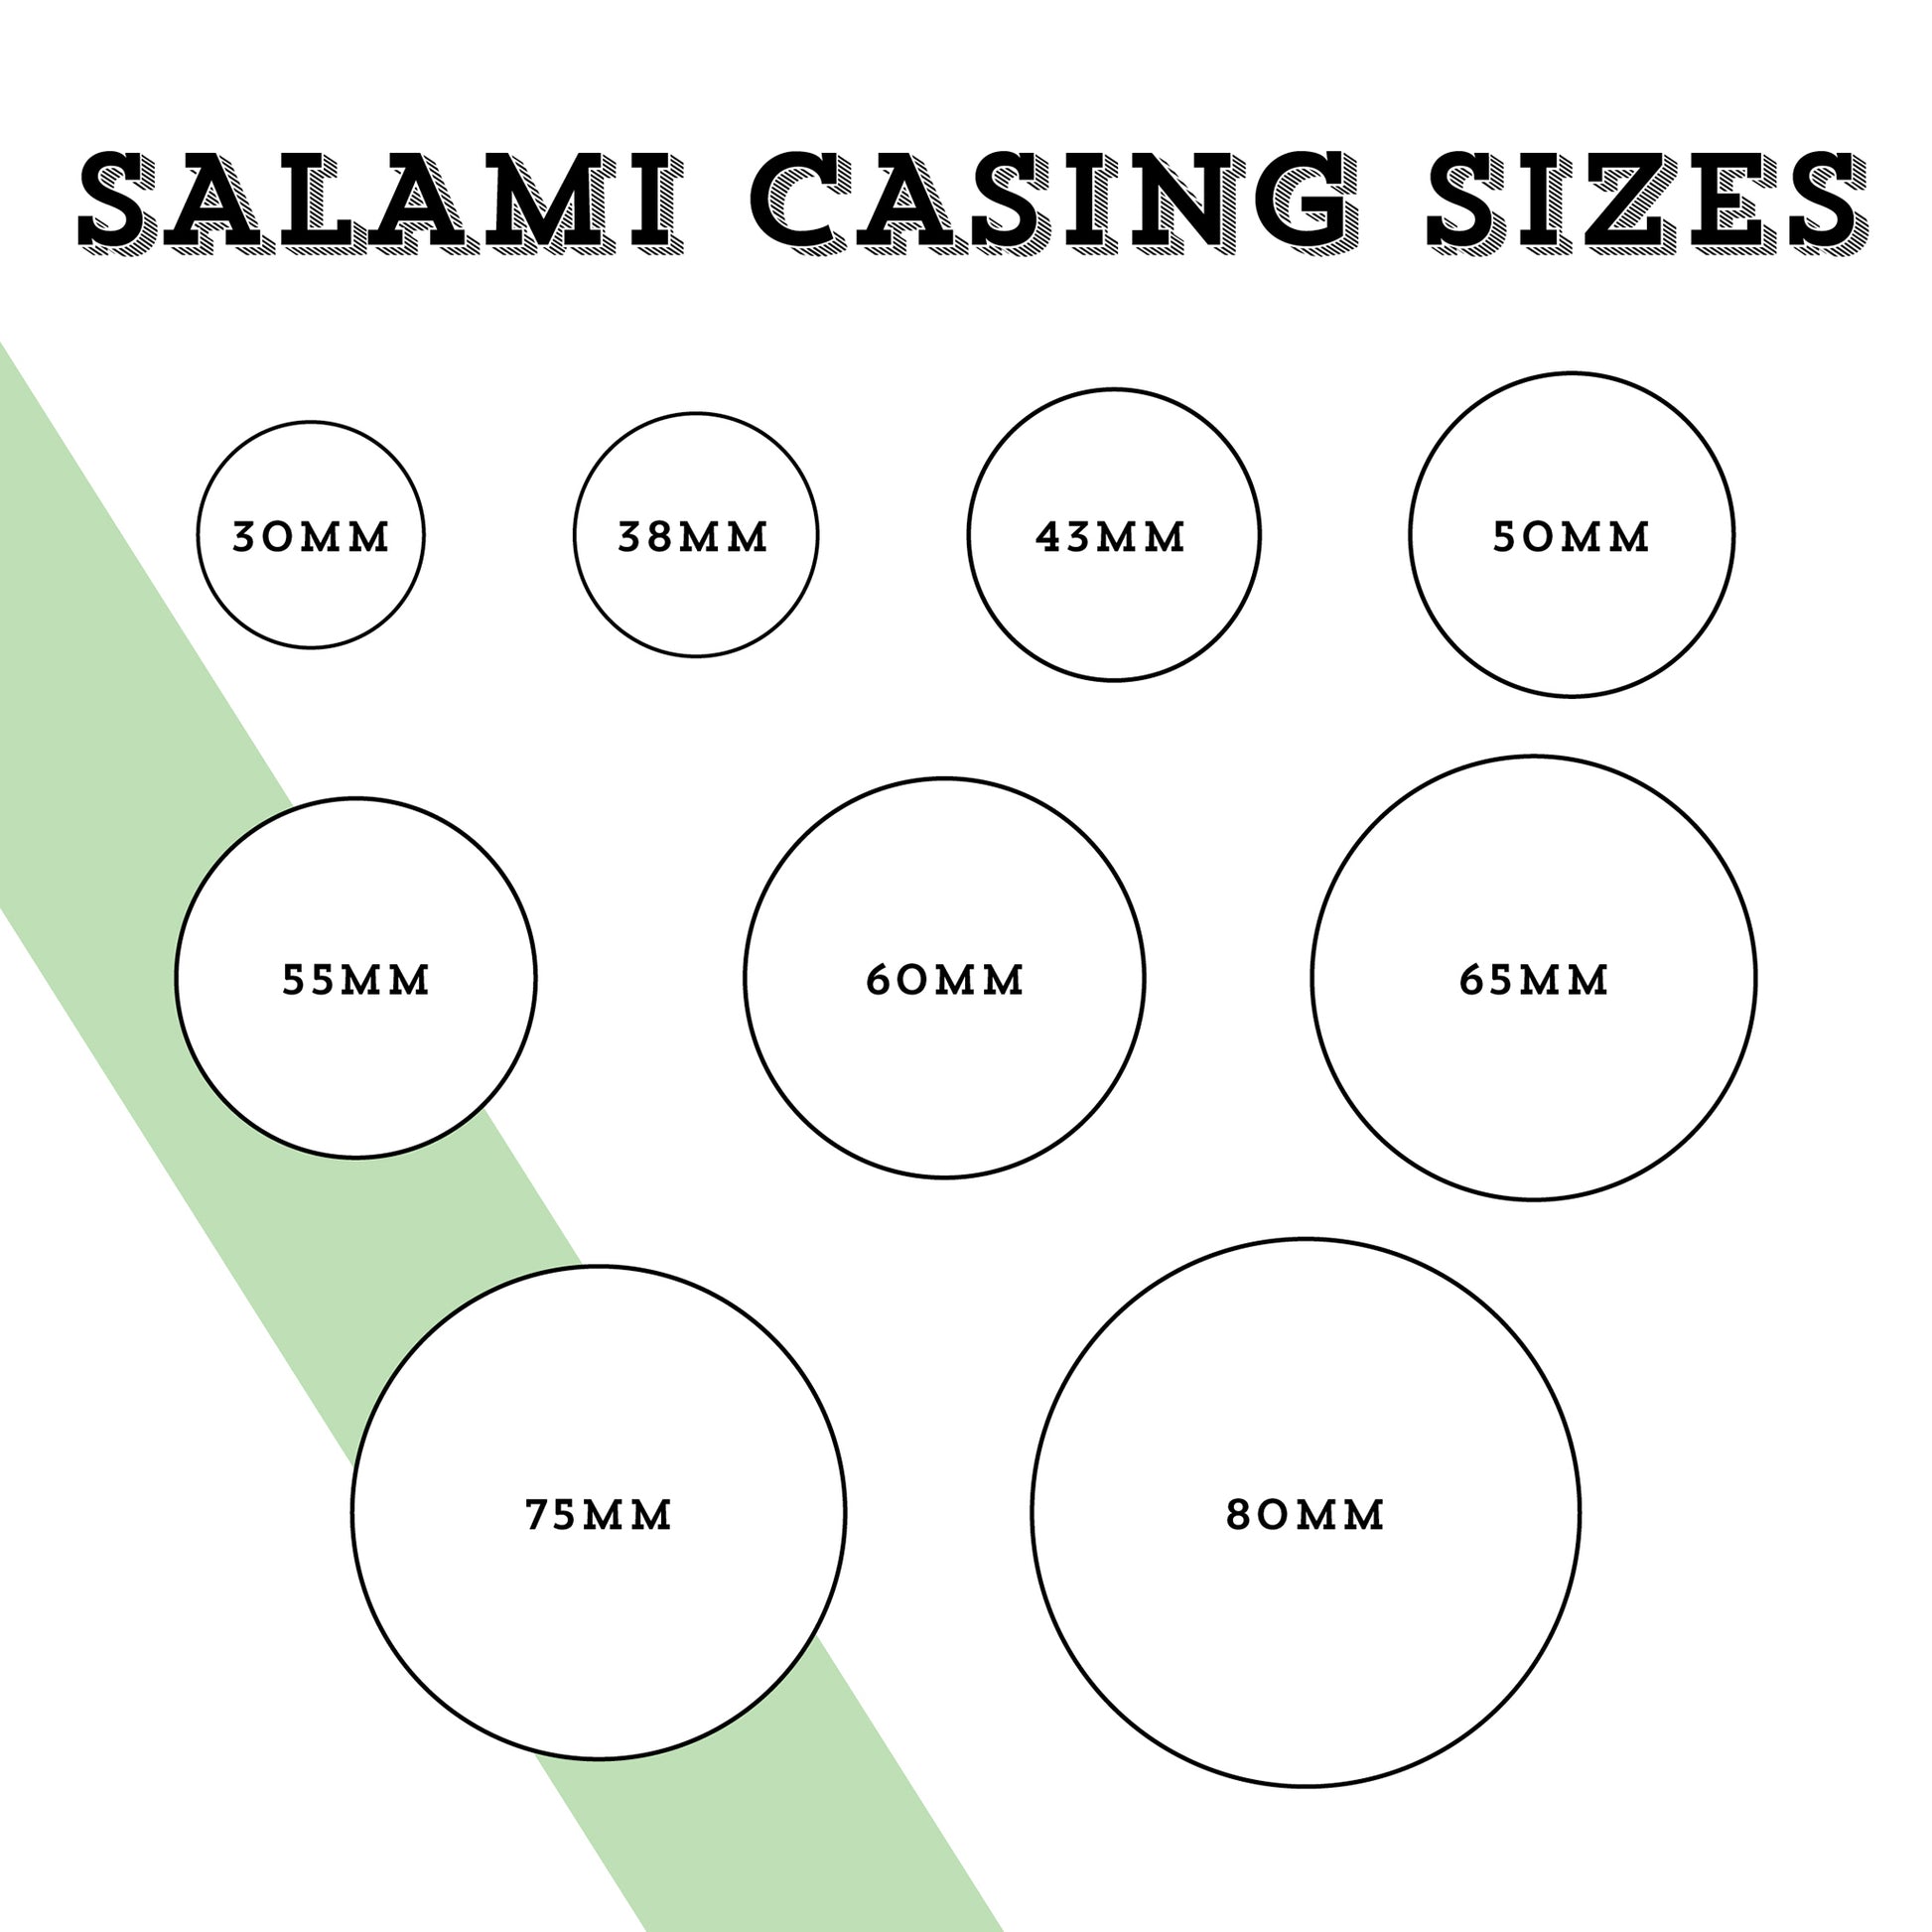 Image showing casing sizes in diameter after dried